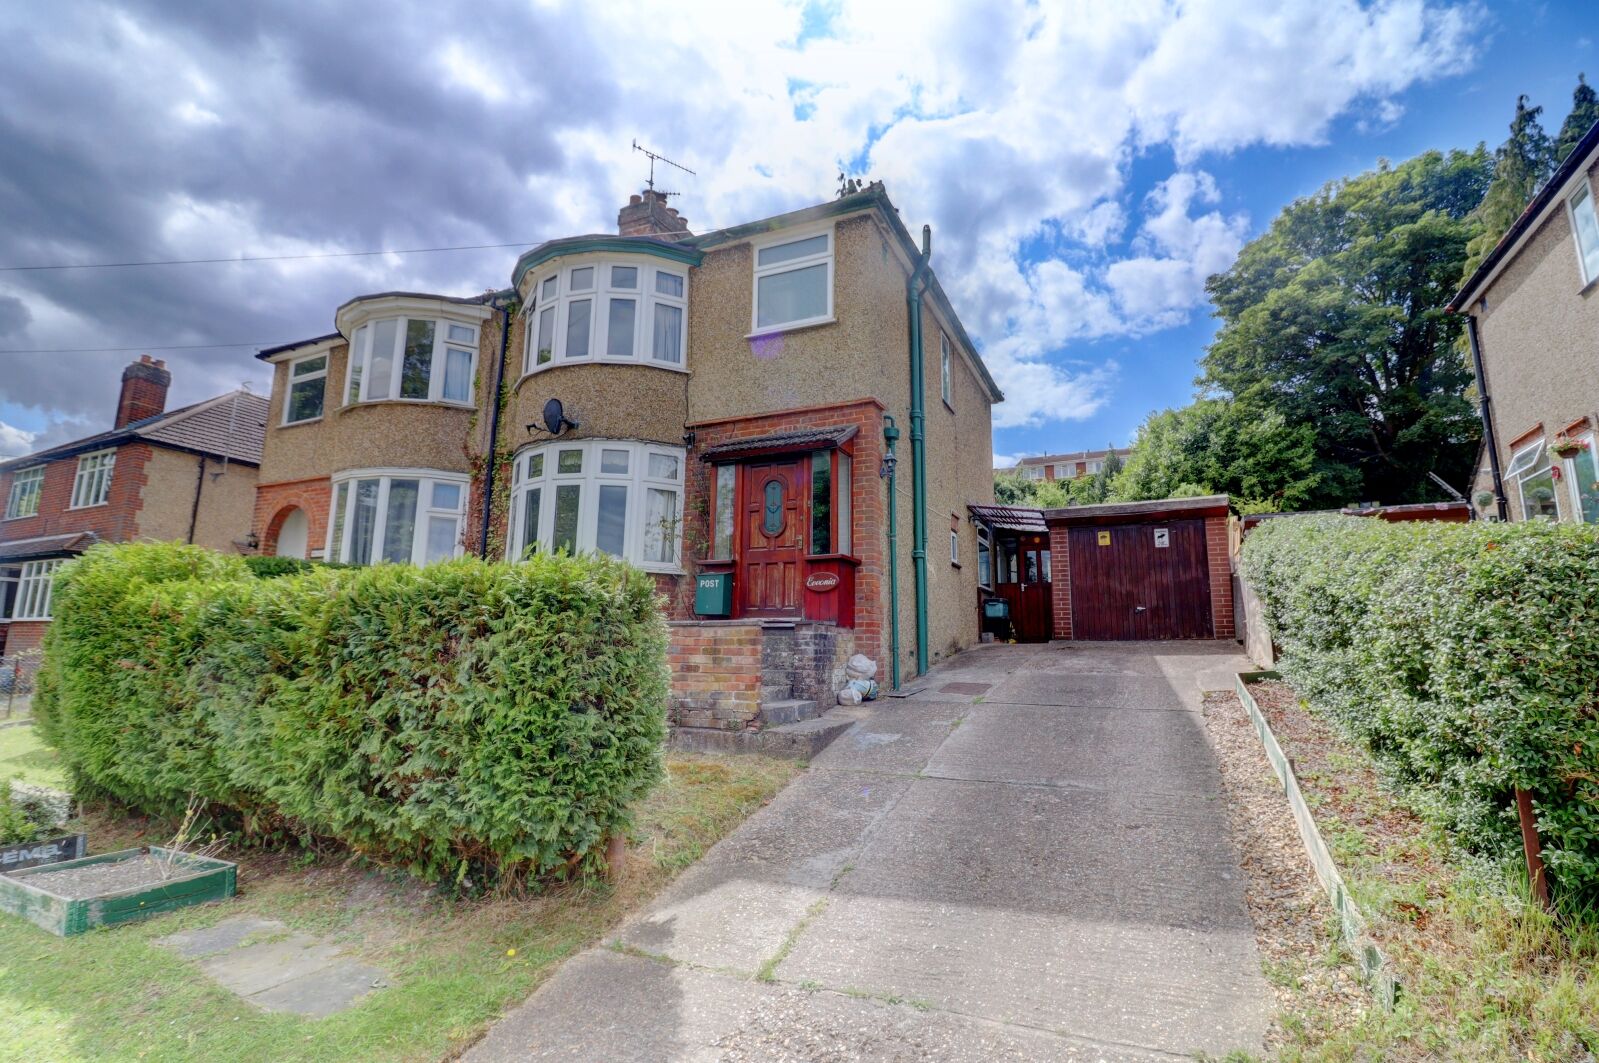 3 bedroom semi detached house for sale Lisle Road, High Wycombe, HP13, main image